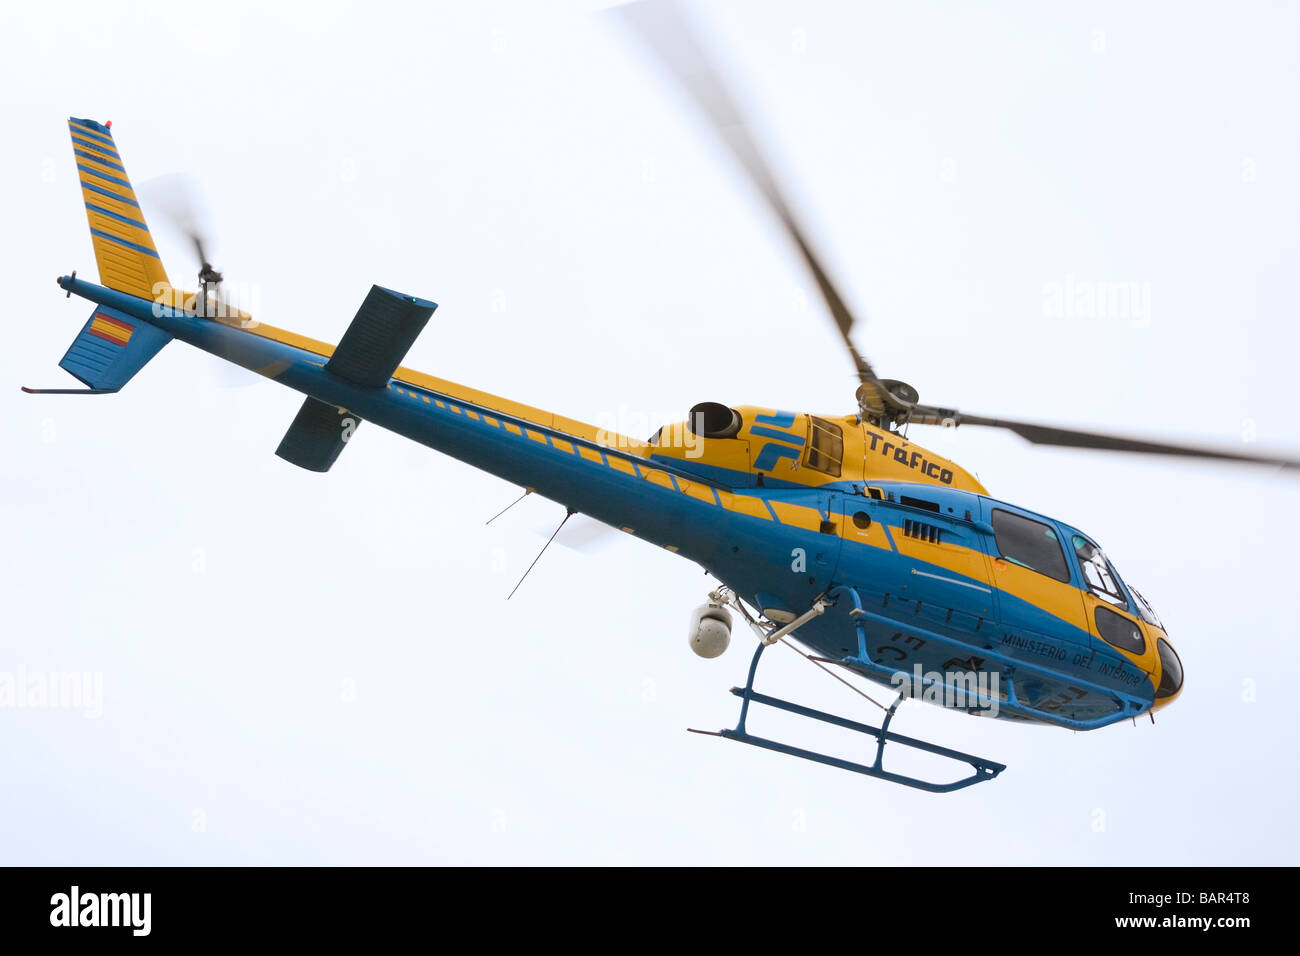 Spanish Traffic Control helicopter taking off Stock Photo